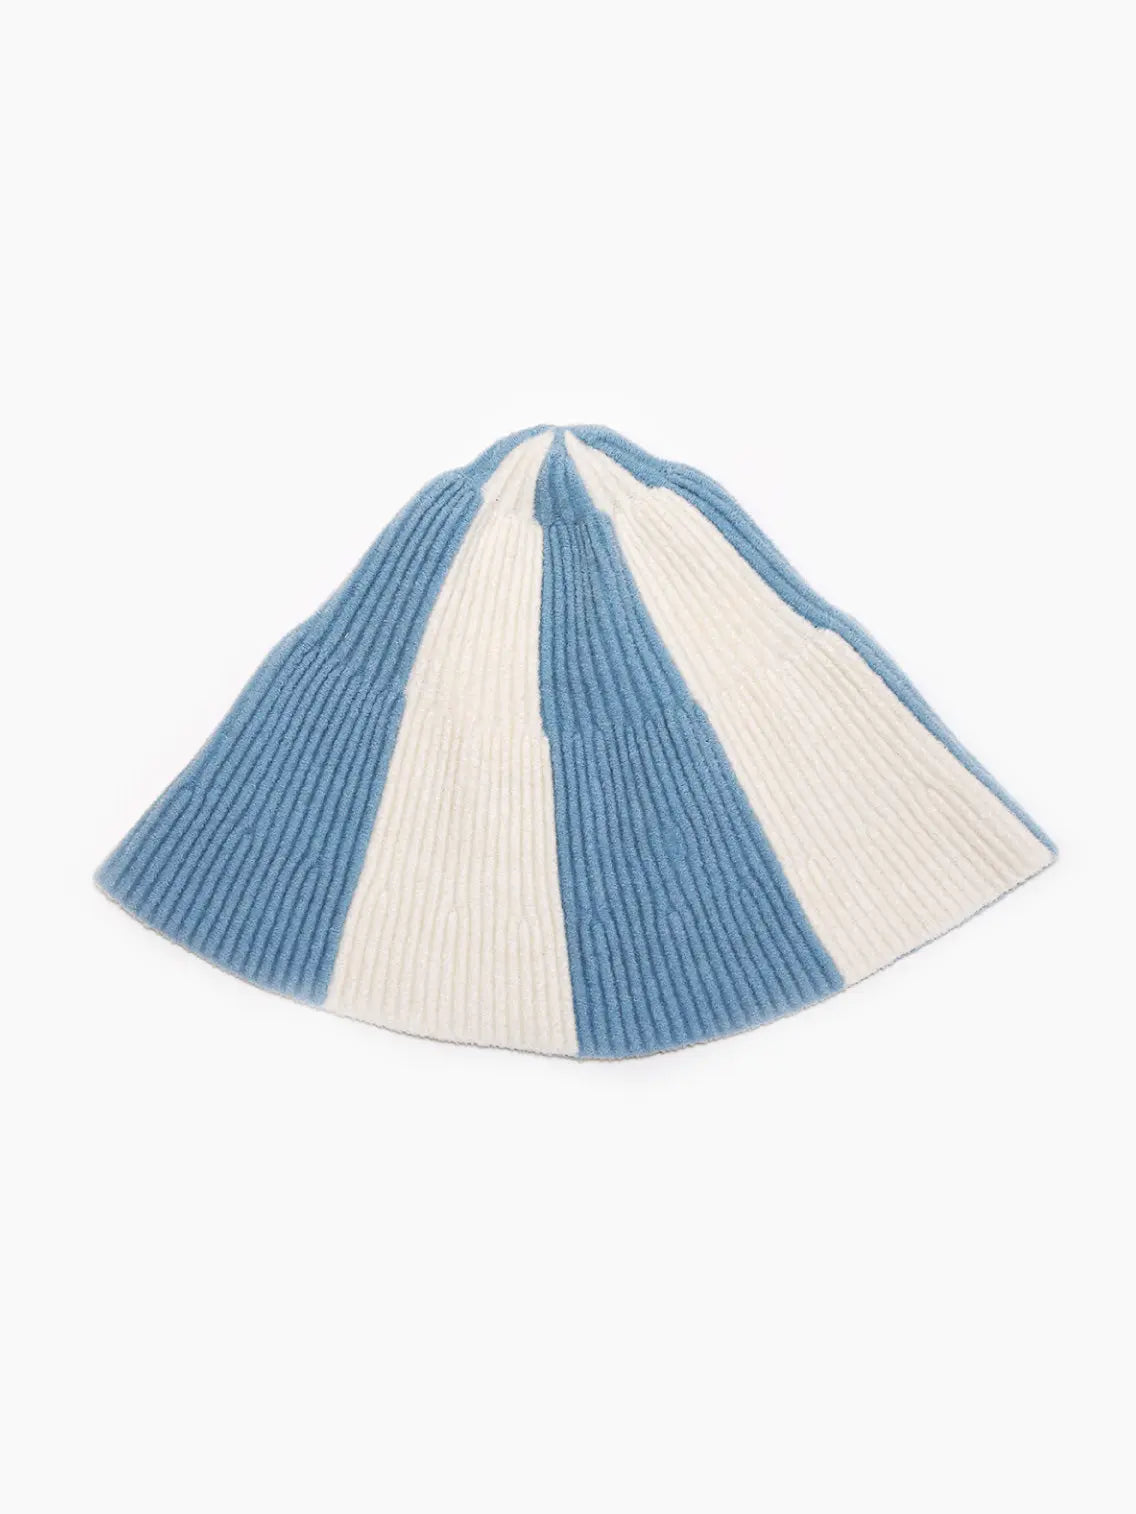 A conical knitted hat with alternating blue and white vertical stripes, available at Bassalstore. The Yuzu Hat by Rus features a ribbed texture of the fabric that is clearly visible, and the hat has a slightly flared brim at the bottom. The background is plain white.